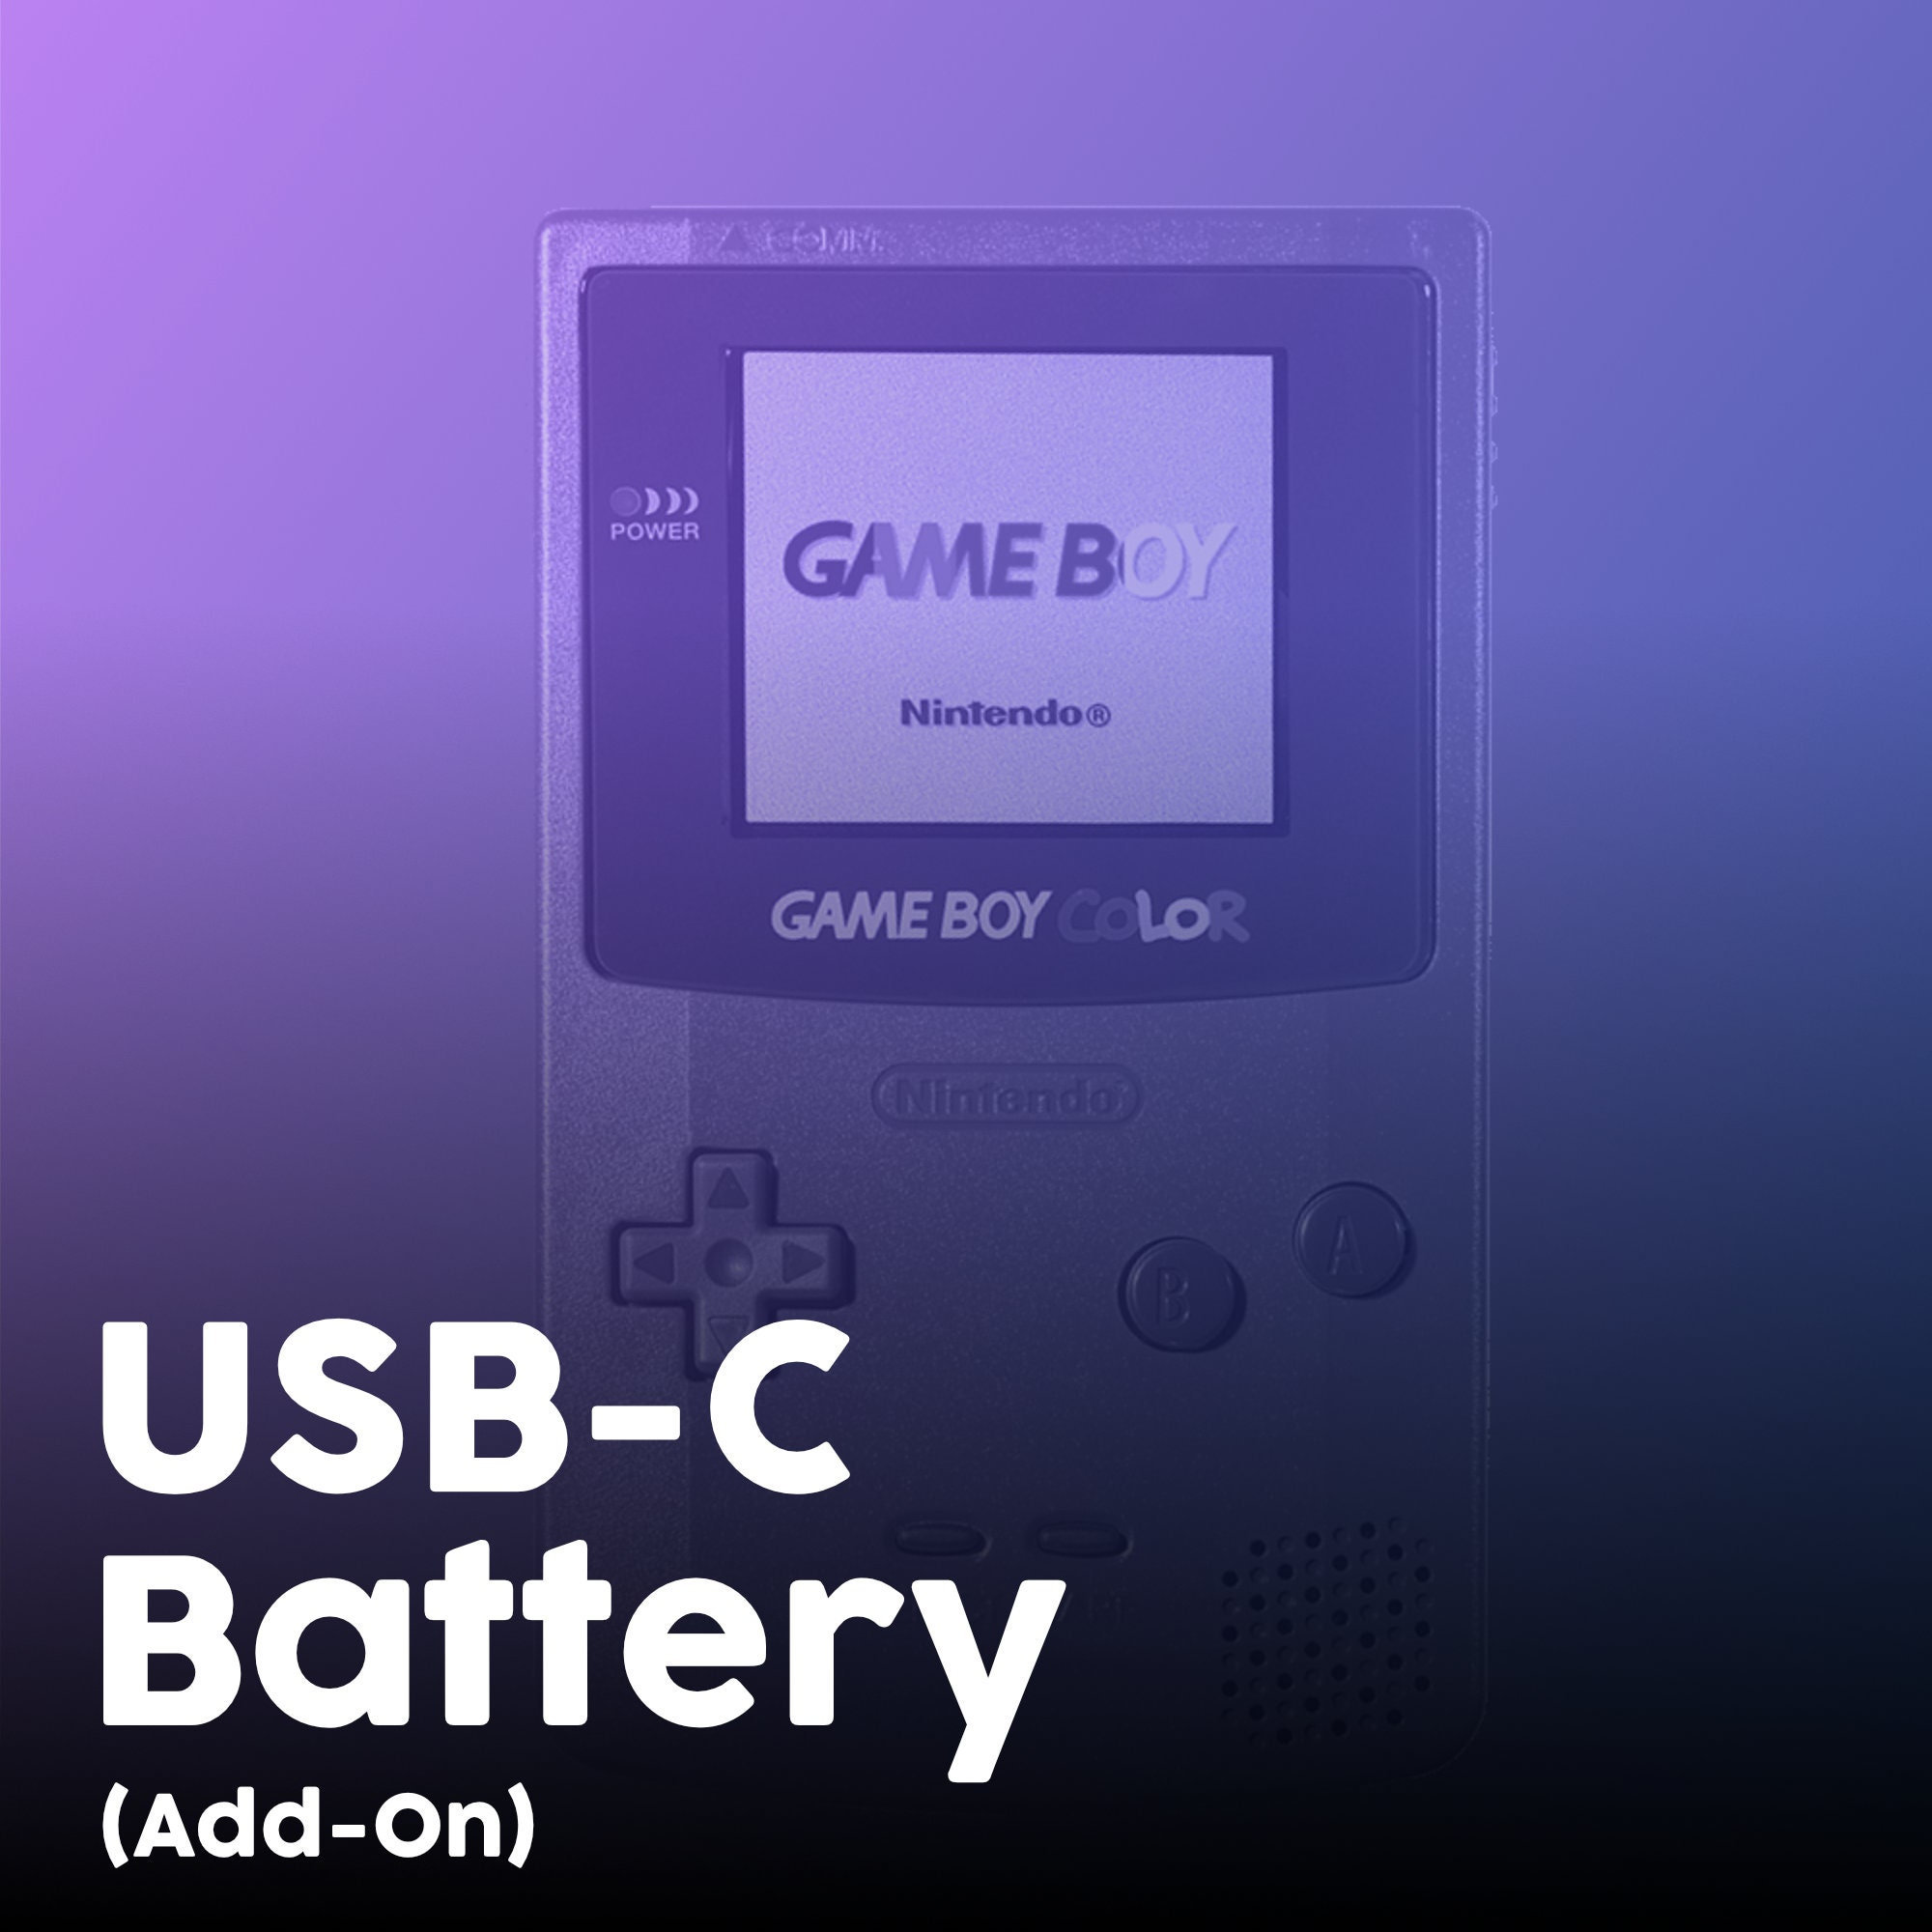 USB-C Charging Kit for Game Boy Color from The giltesa's shop on